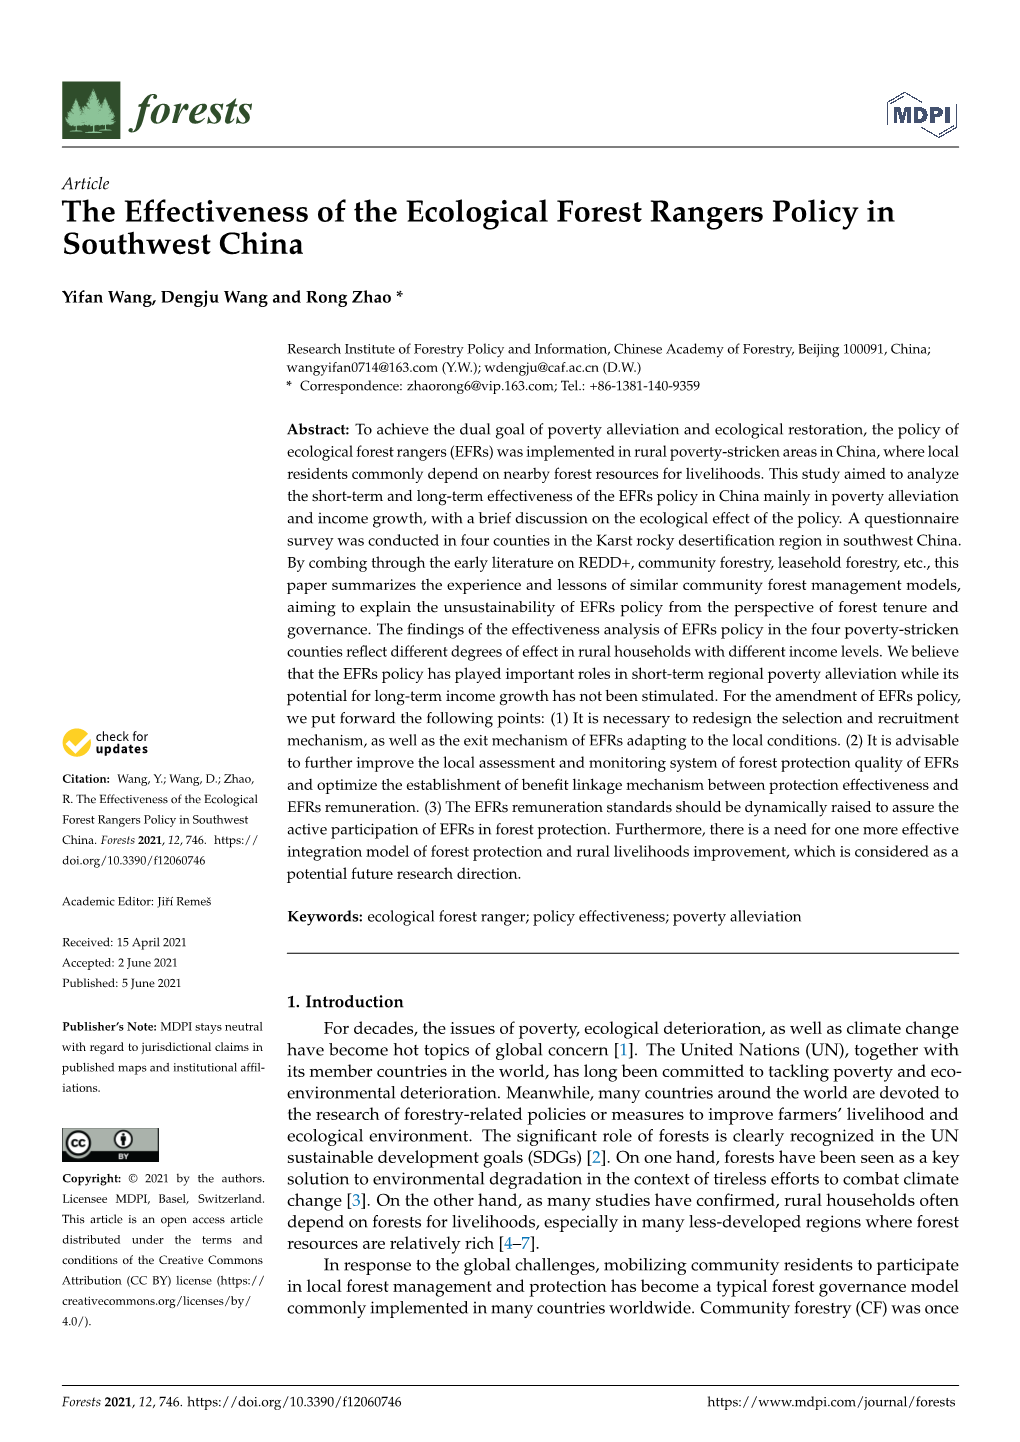 The Effectiveness of the Ecological Forest Rangers Policy in Southwest China